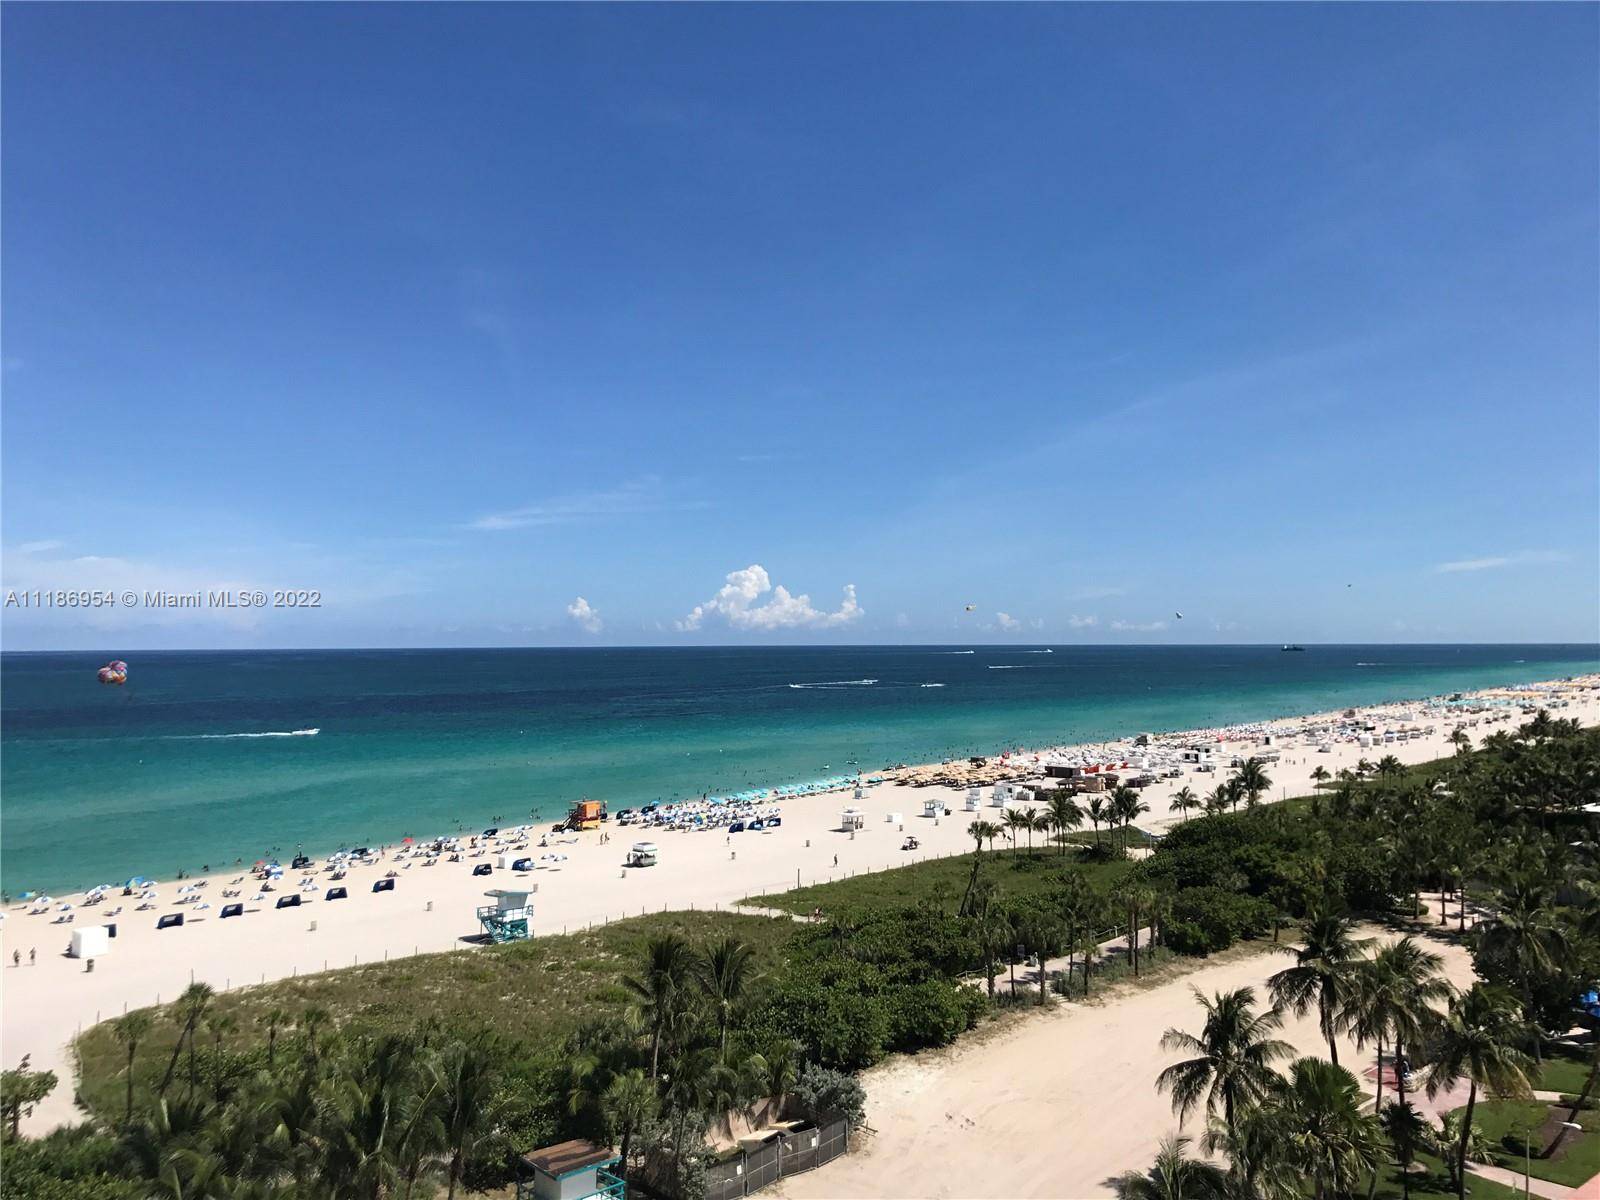 Exquisitely finished and furnished one bedroom plus den with two twin beds in the den, oceanfront condo hotel residence.